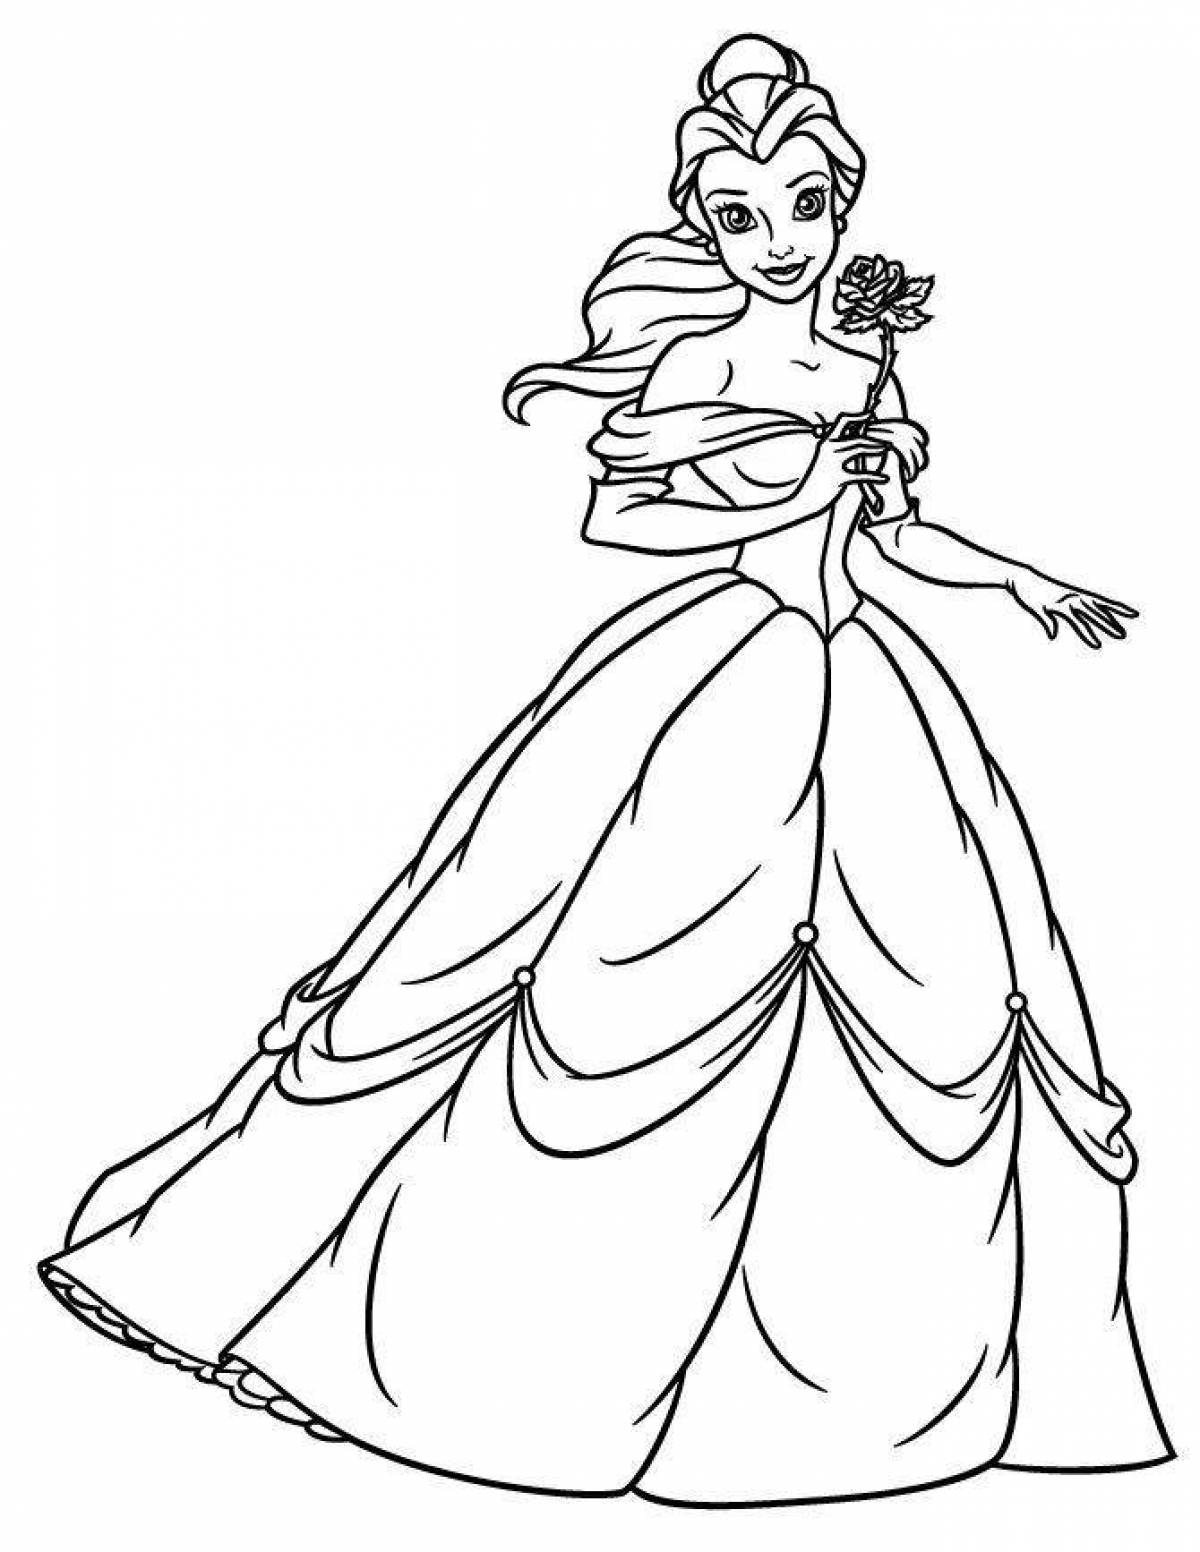 Exotic princess belle coloring page